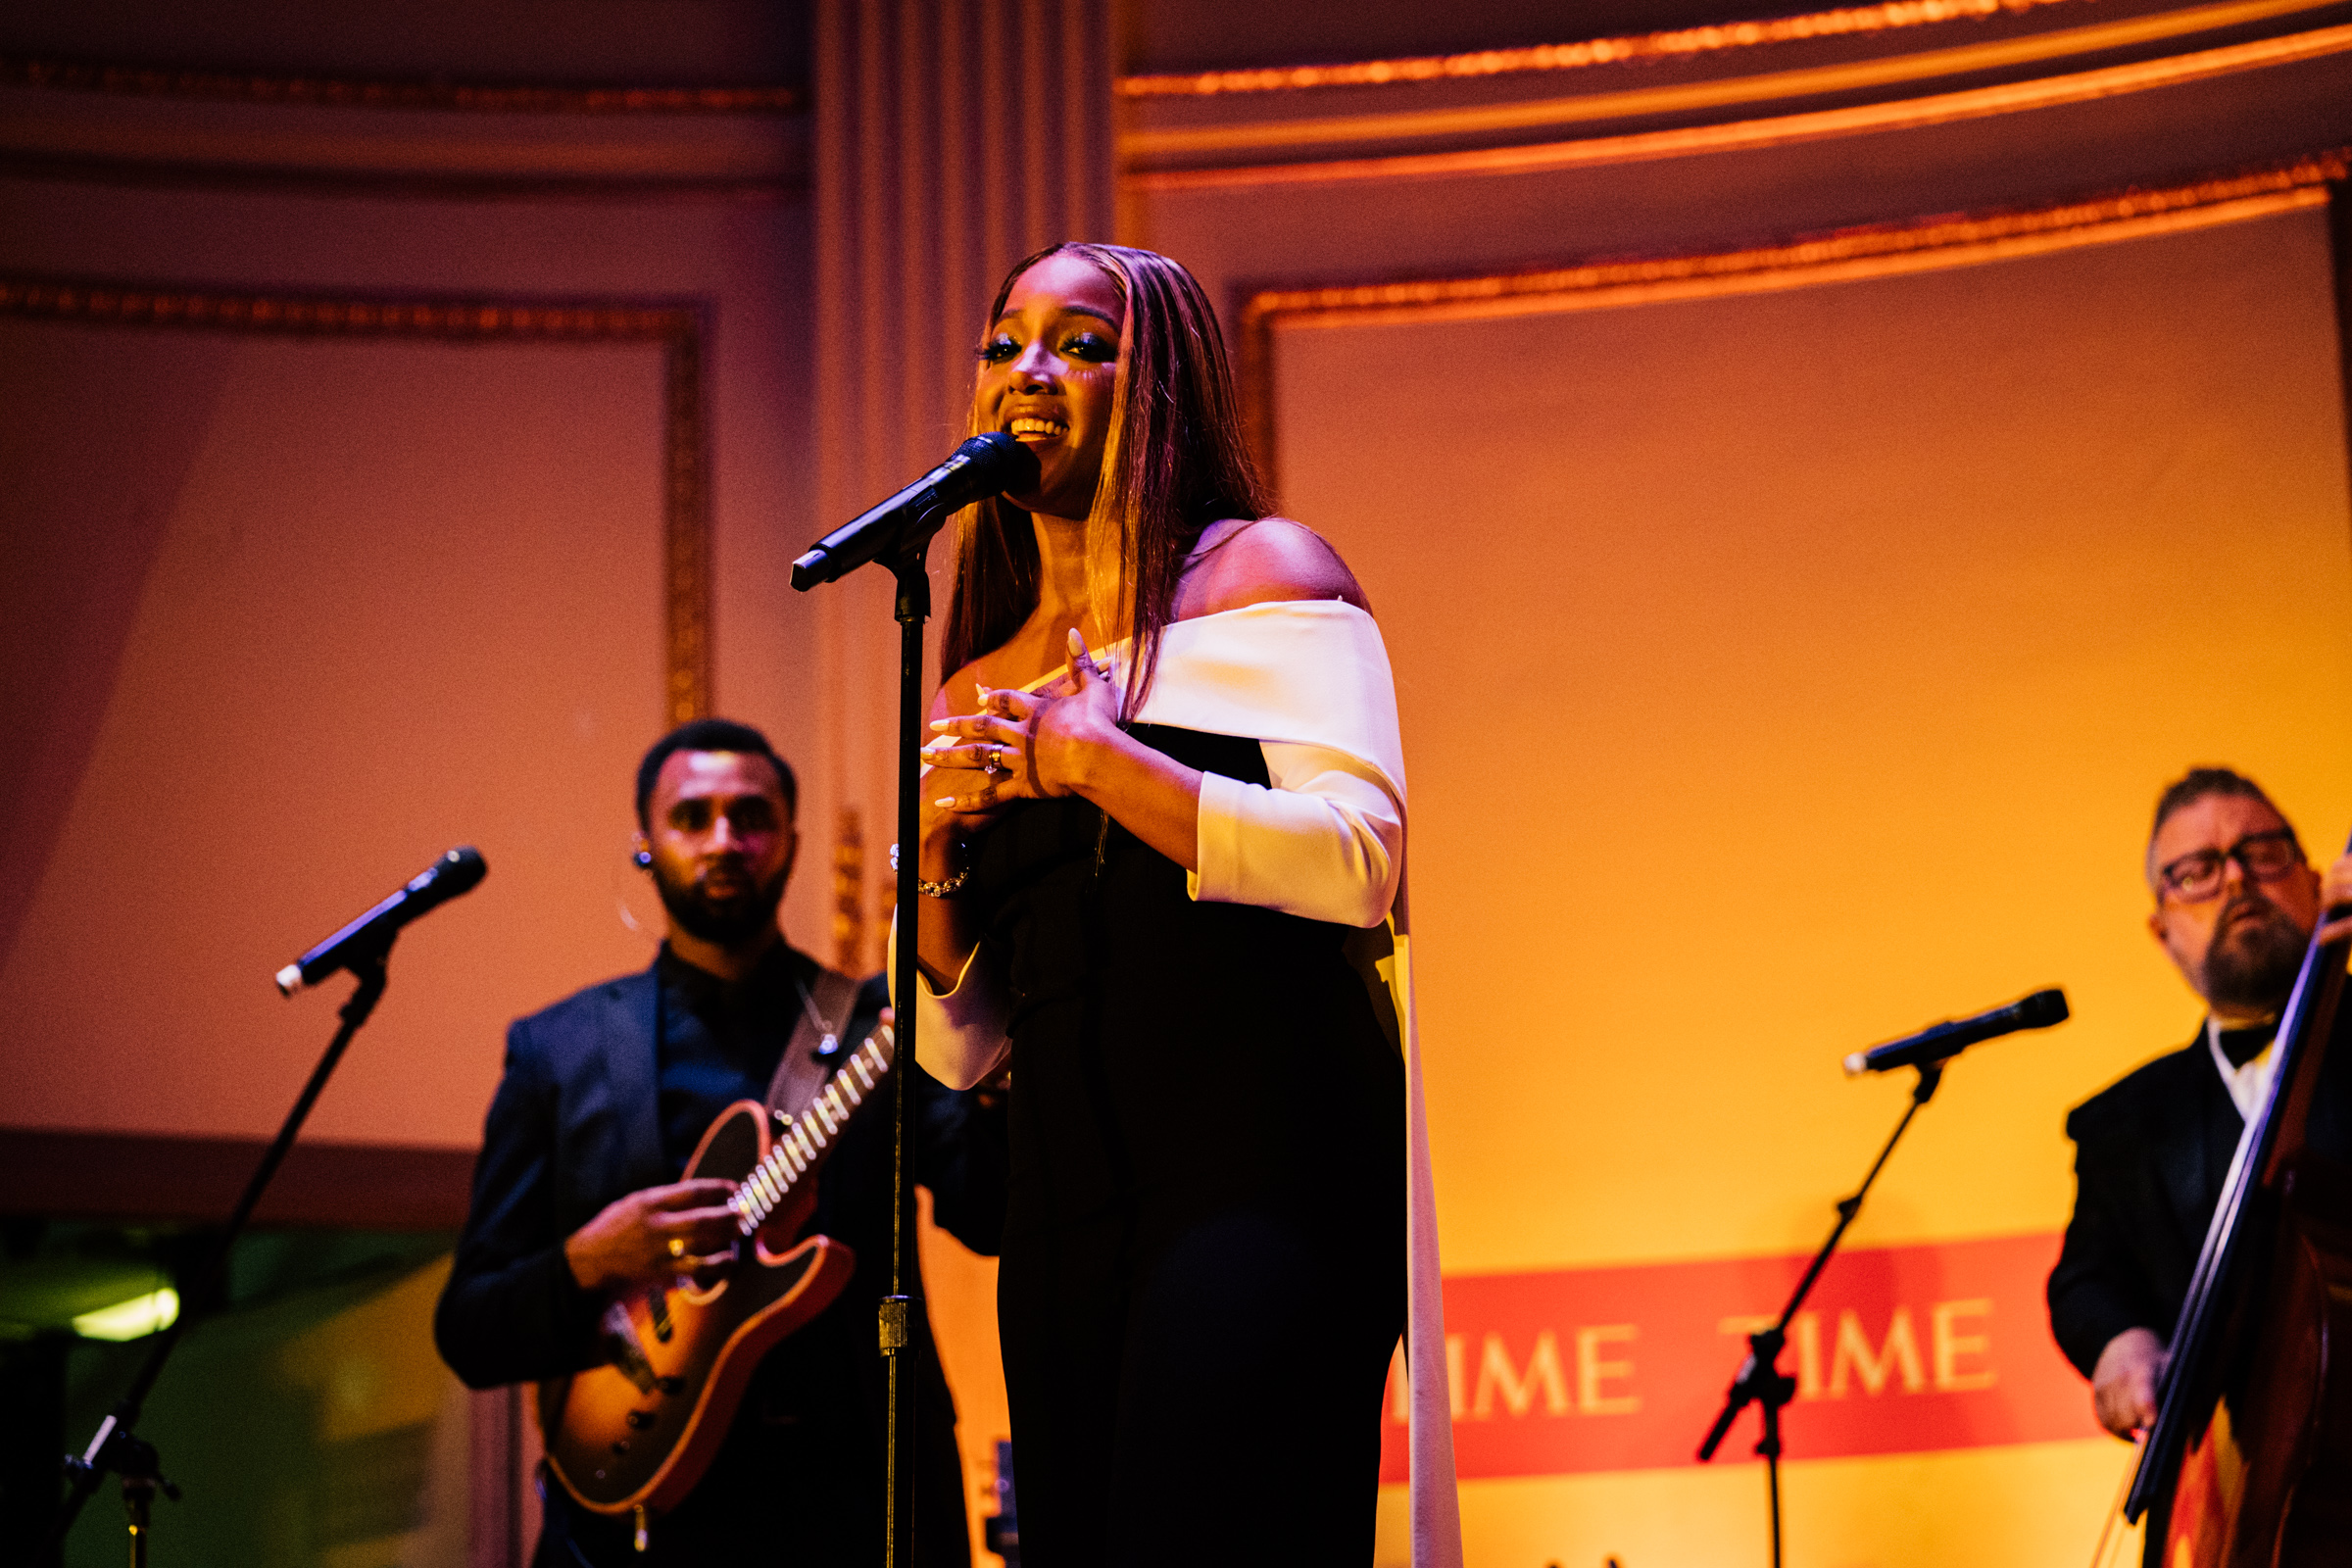 TIME’s 2022 Breakthrough Artist of the Year Mickey Guyton peforming at the TIME 2022 Person of the Year reception, at The Plaza Hotel in New York City, on Dec. 8, 2022. (Poupay Jutharat for TIME)